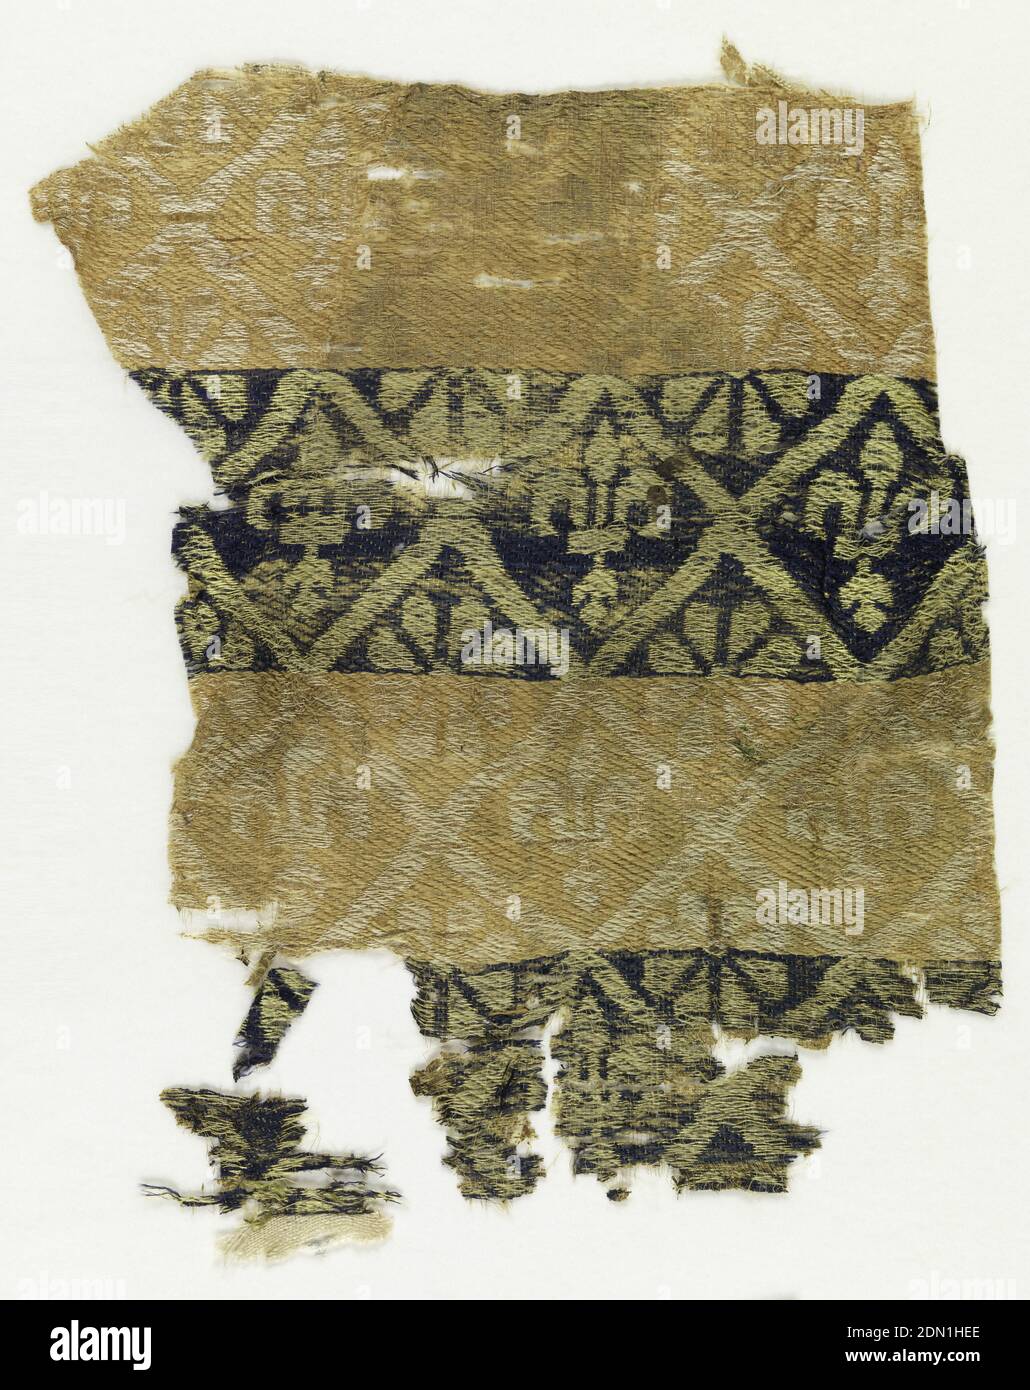 Fragment, Medium: silk Technique: compound weft twill (samite), Fleur de lys within a diamond grid on a banded background in beige, white, blue and green., possibly Sicily, 13th century, woven textiles, Fragment Stock Photo